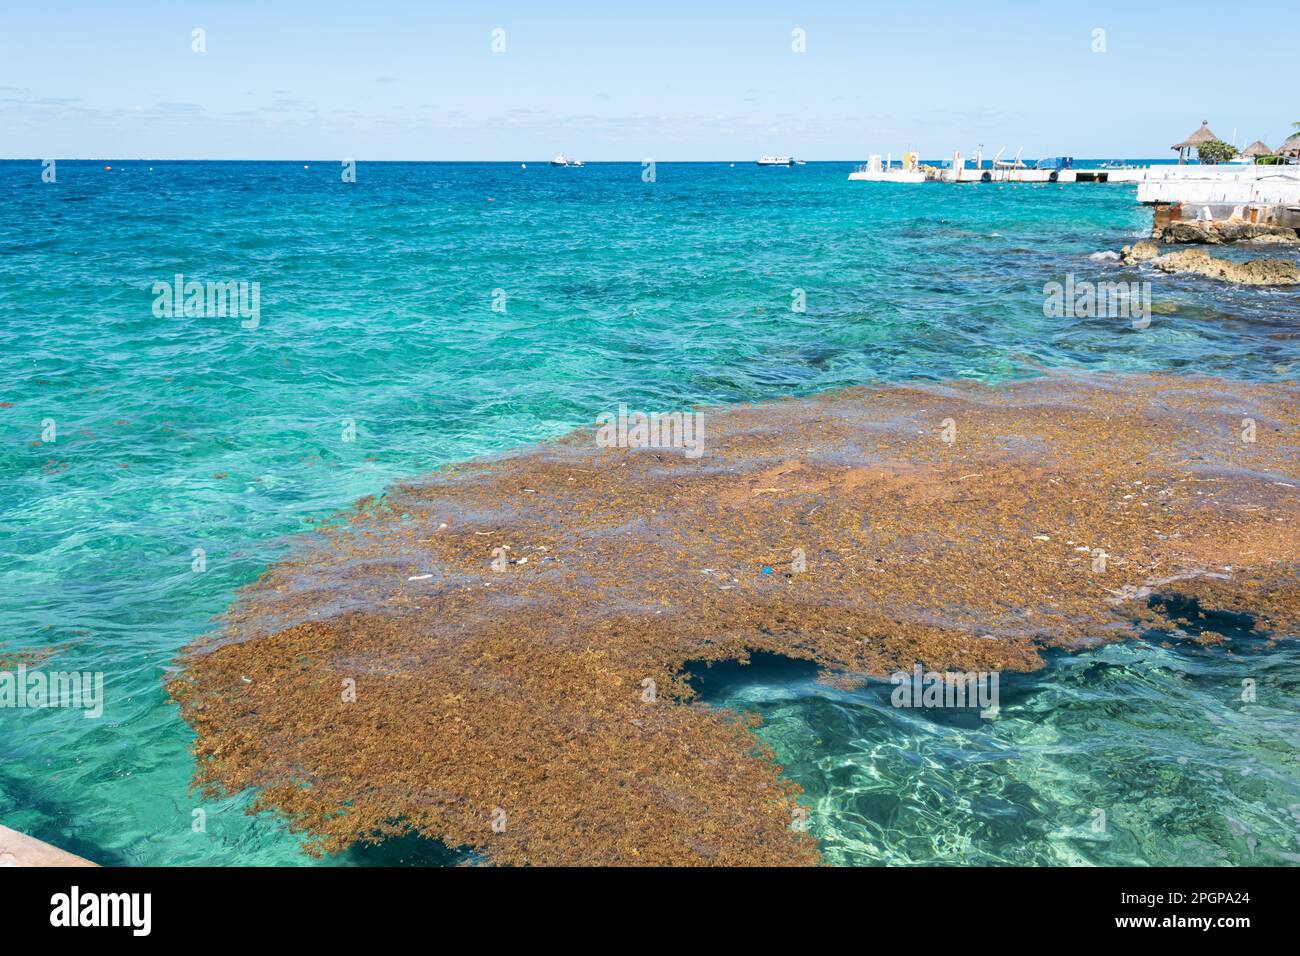 sargassum floating in the mexican caribbean sea Stock Photo